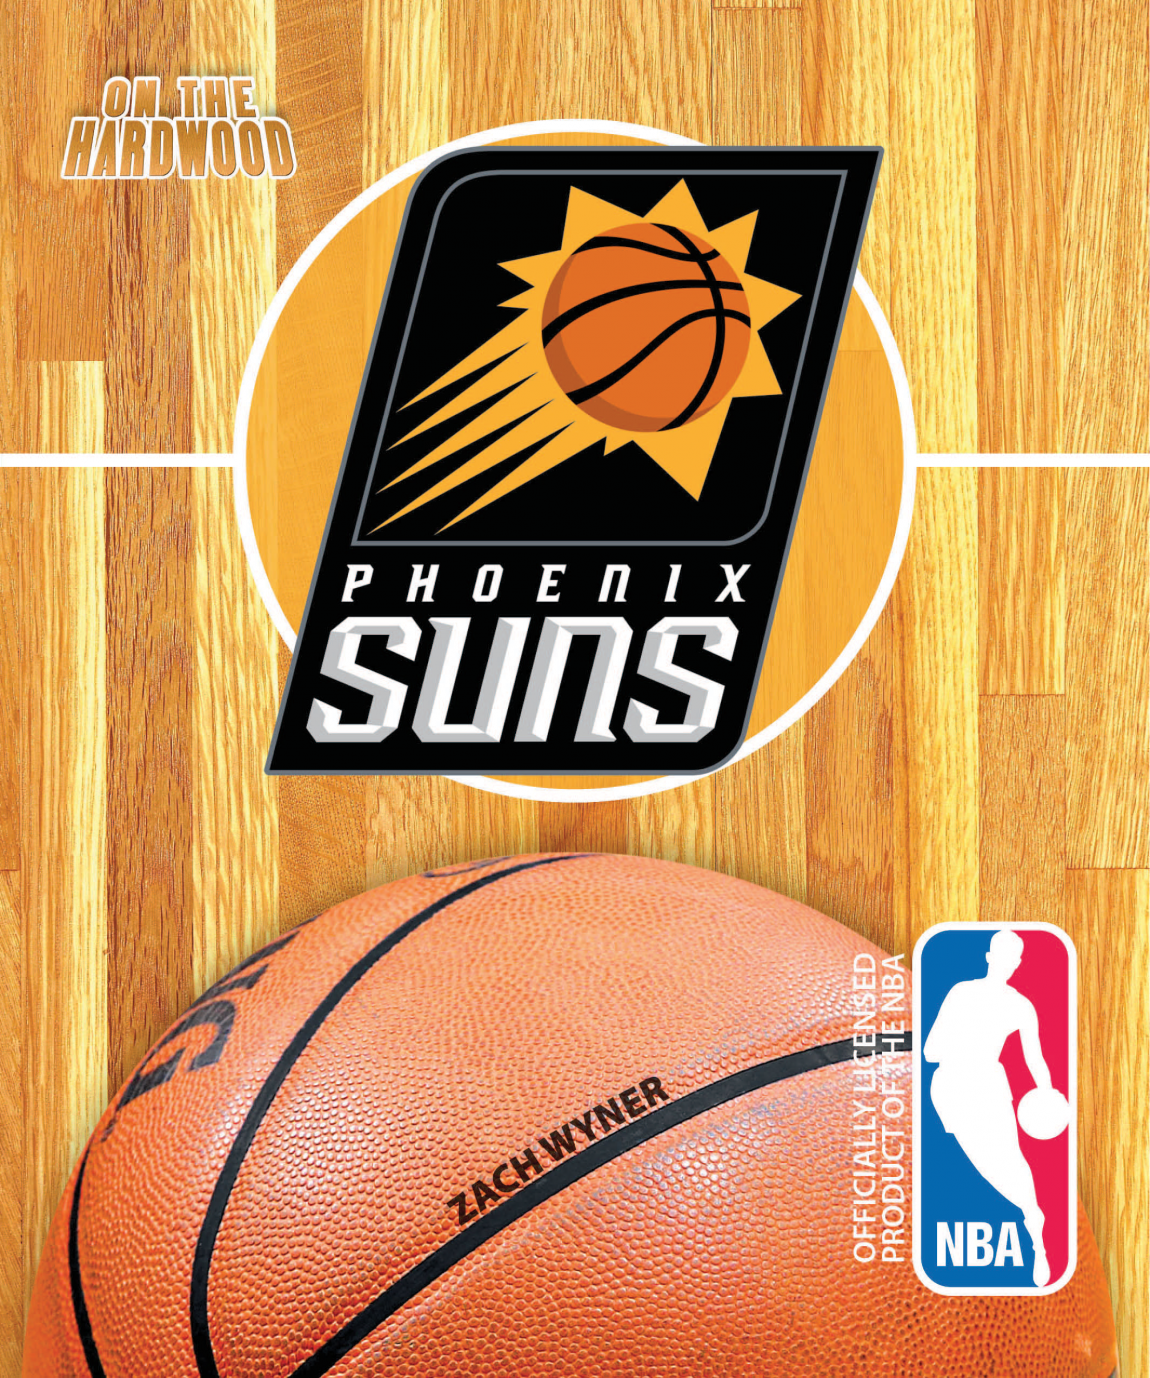 Suns-1.png